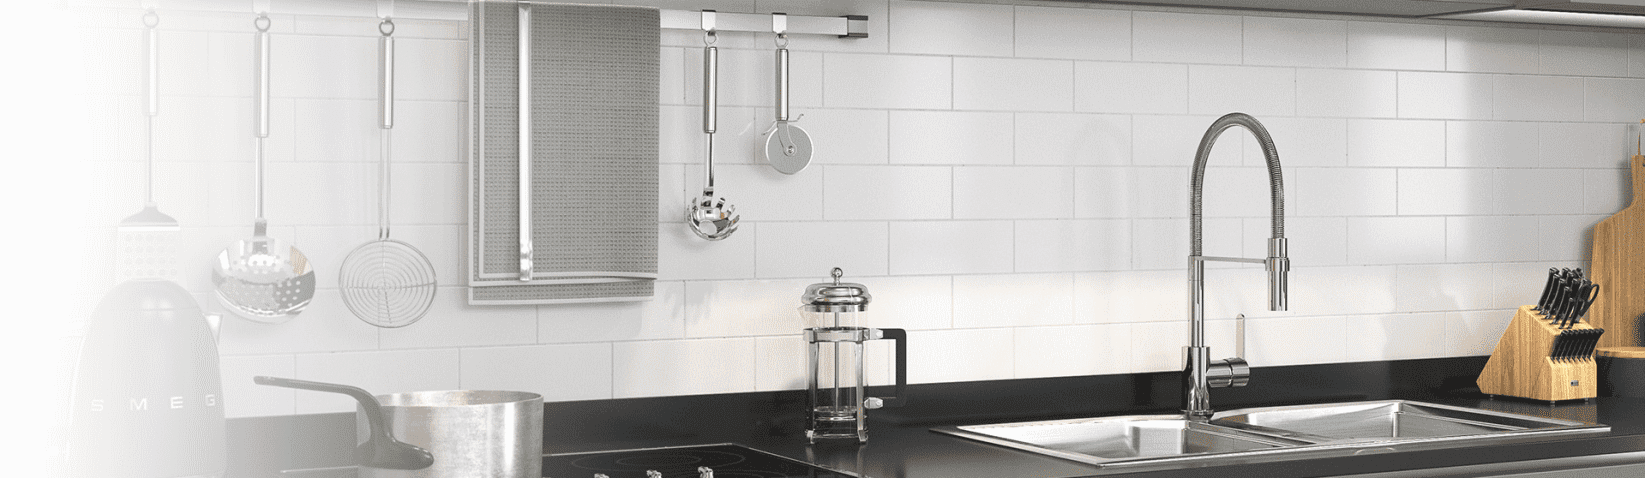 Installed example of Methven kitchen tap